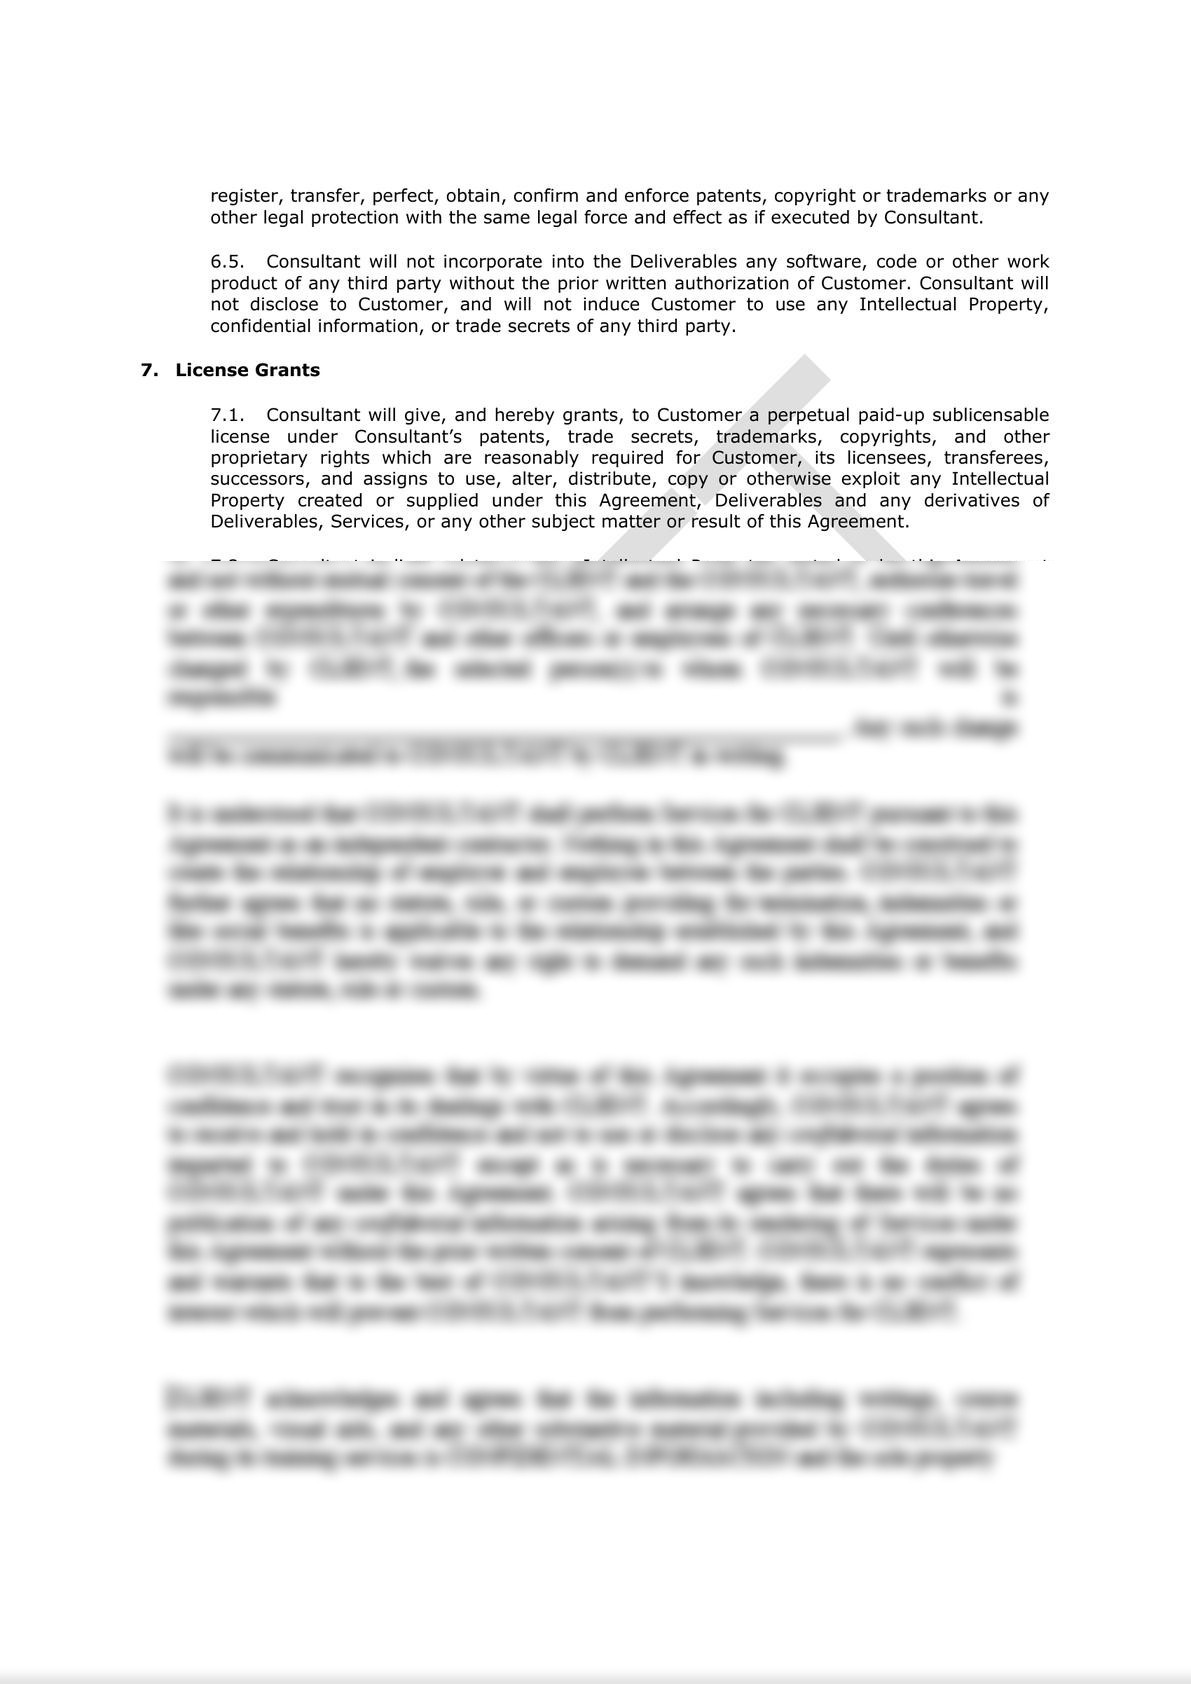 Software Consulting Agreement (Pro-Customer)-3